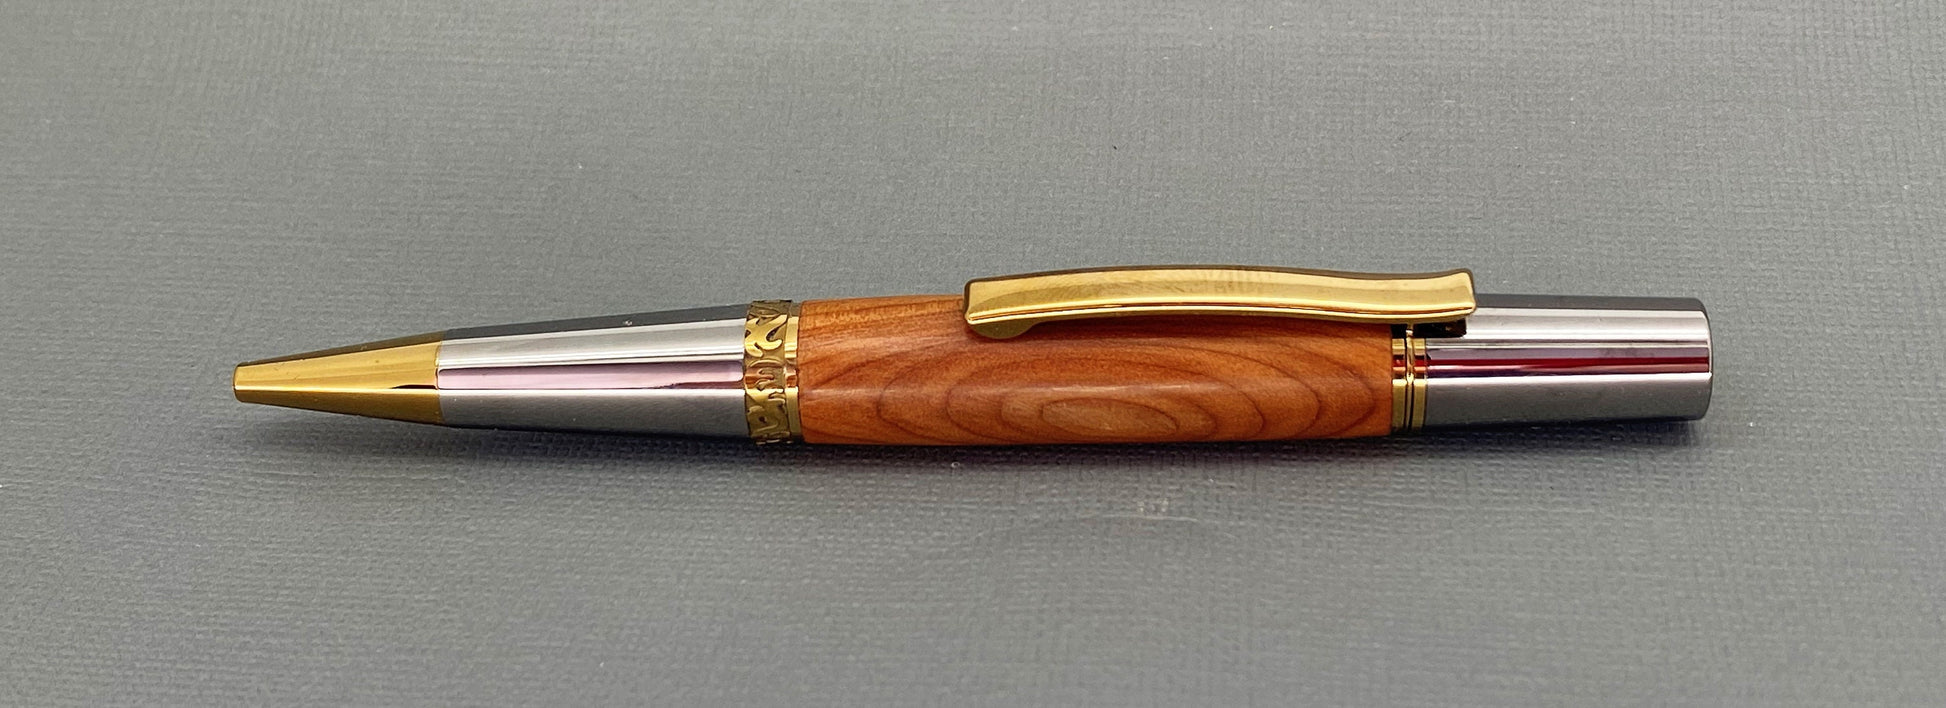 Handturned English Yew wood pen with gold and chrome plated fittings